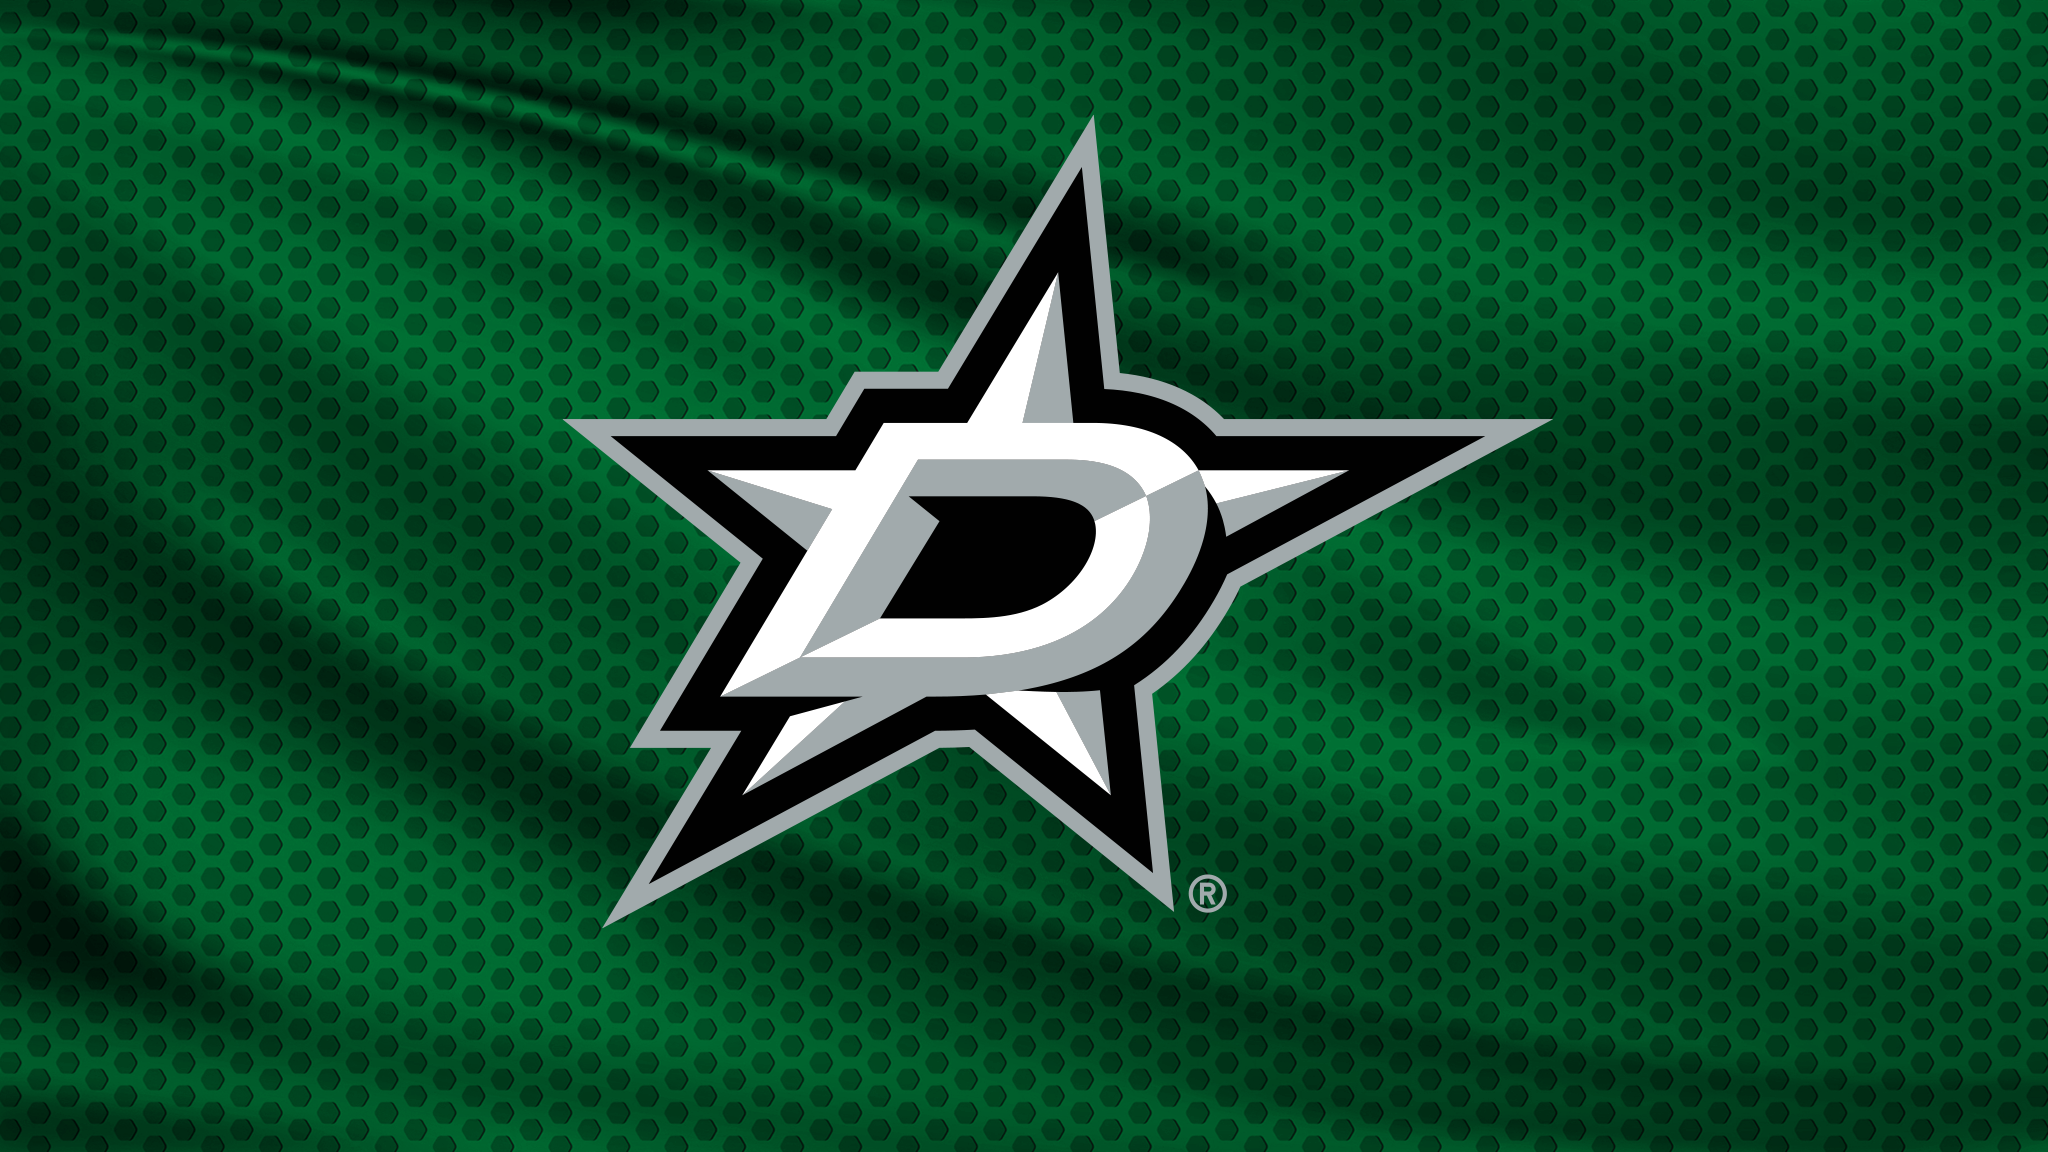 PARKING: Stanley Cup Final: TBD at Stars Rd 4 Hm Gm 1